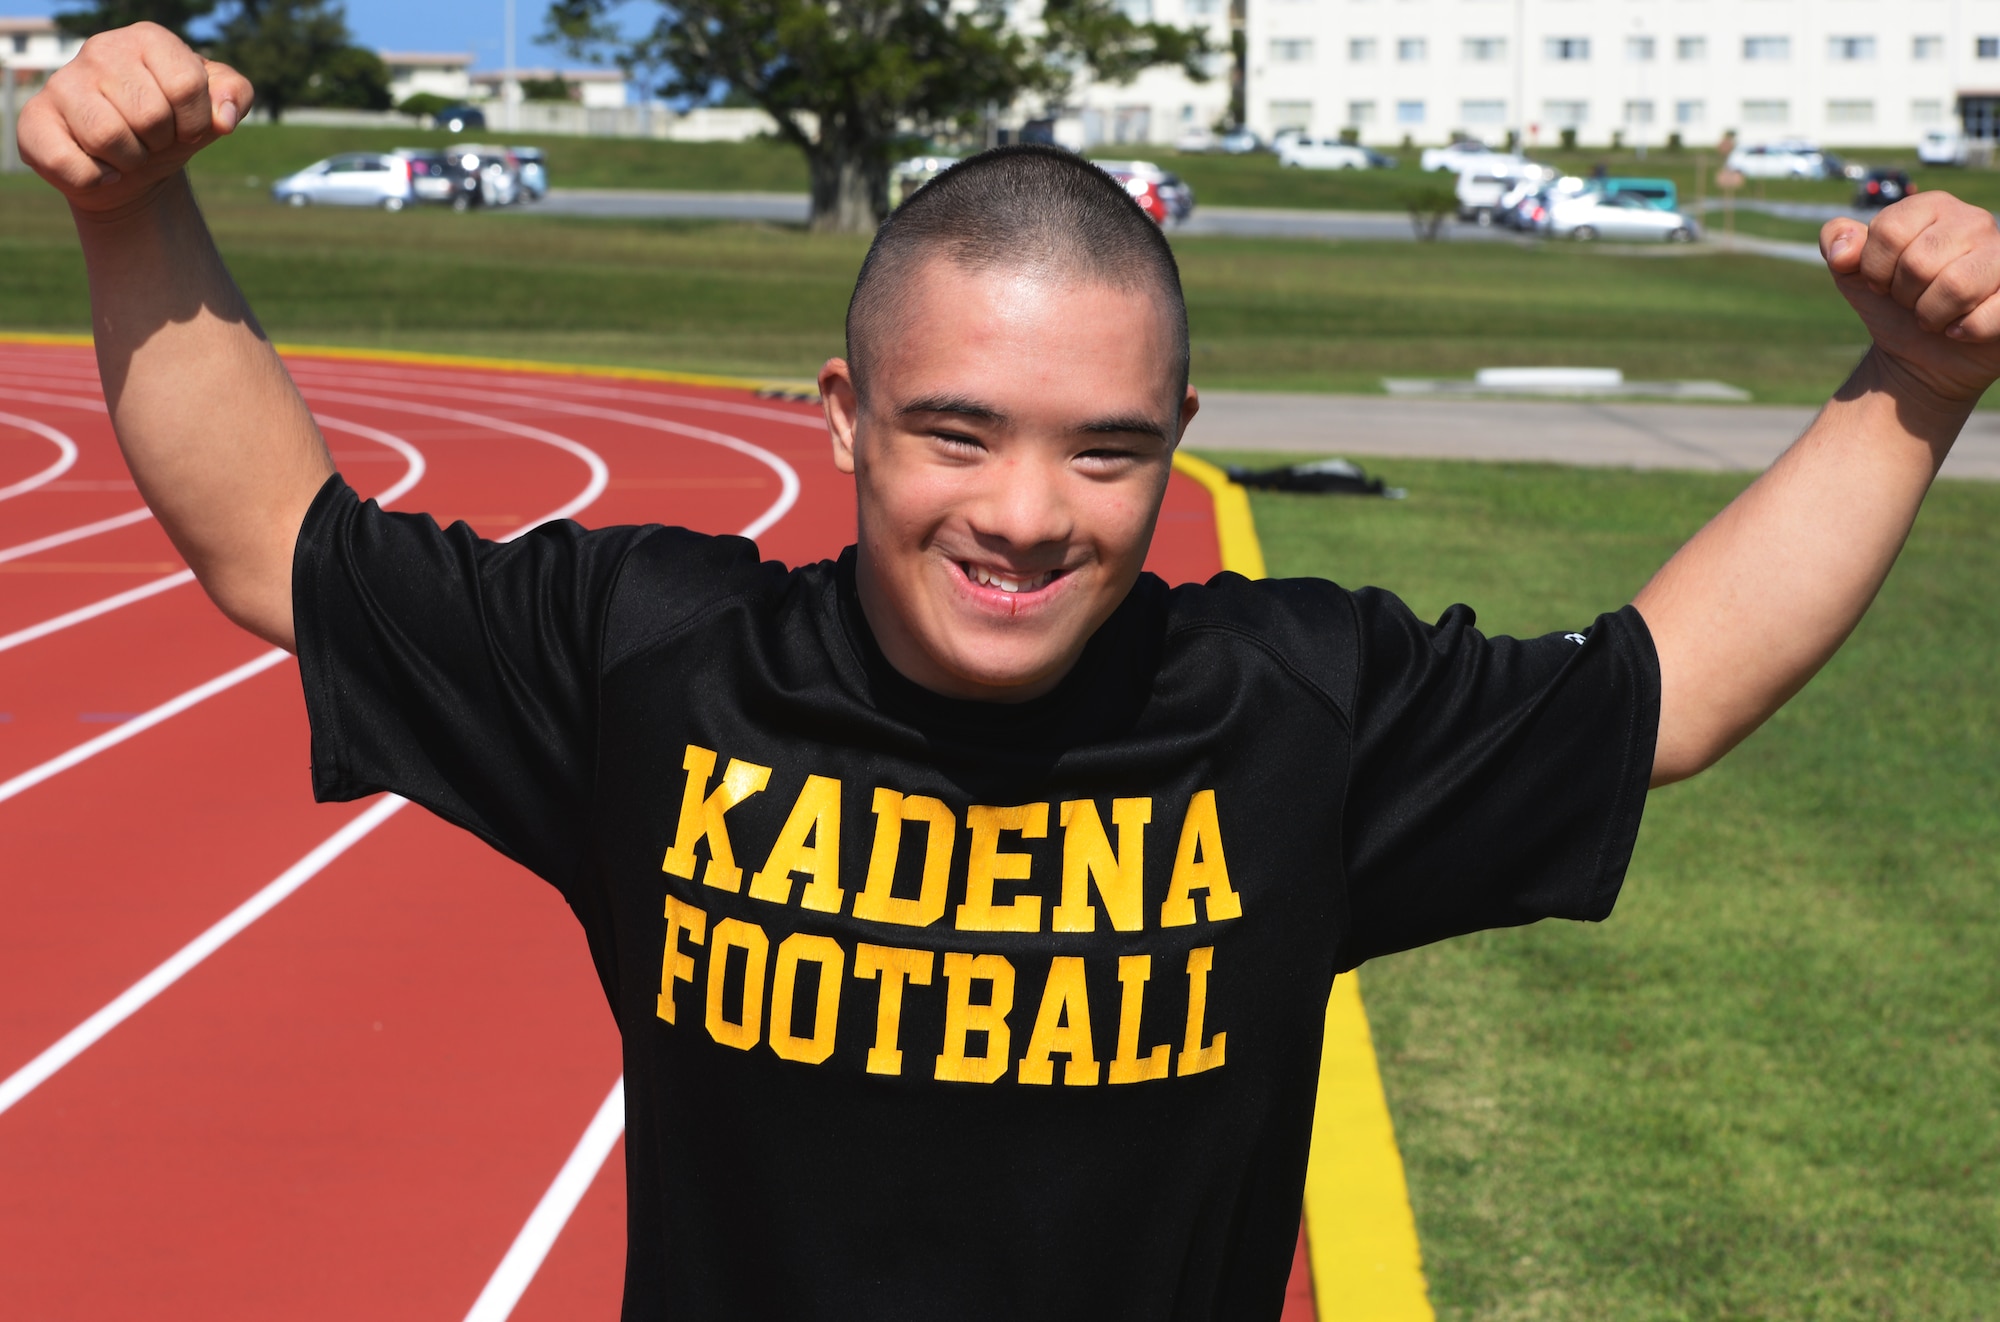 Ty Murdock, Kadena High School 12th grade student, is the honorary captain for his high school football team and competes annually at the Kadena Special Olympic games on Kadena Air Base. Murdock will go for gold again in the KSO after finishing in first place last year. He enjoys the applause and cheering from the crowd when he races in the competition. (U.S. Air Force photo by Senior Airman Omari Bernard)